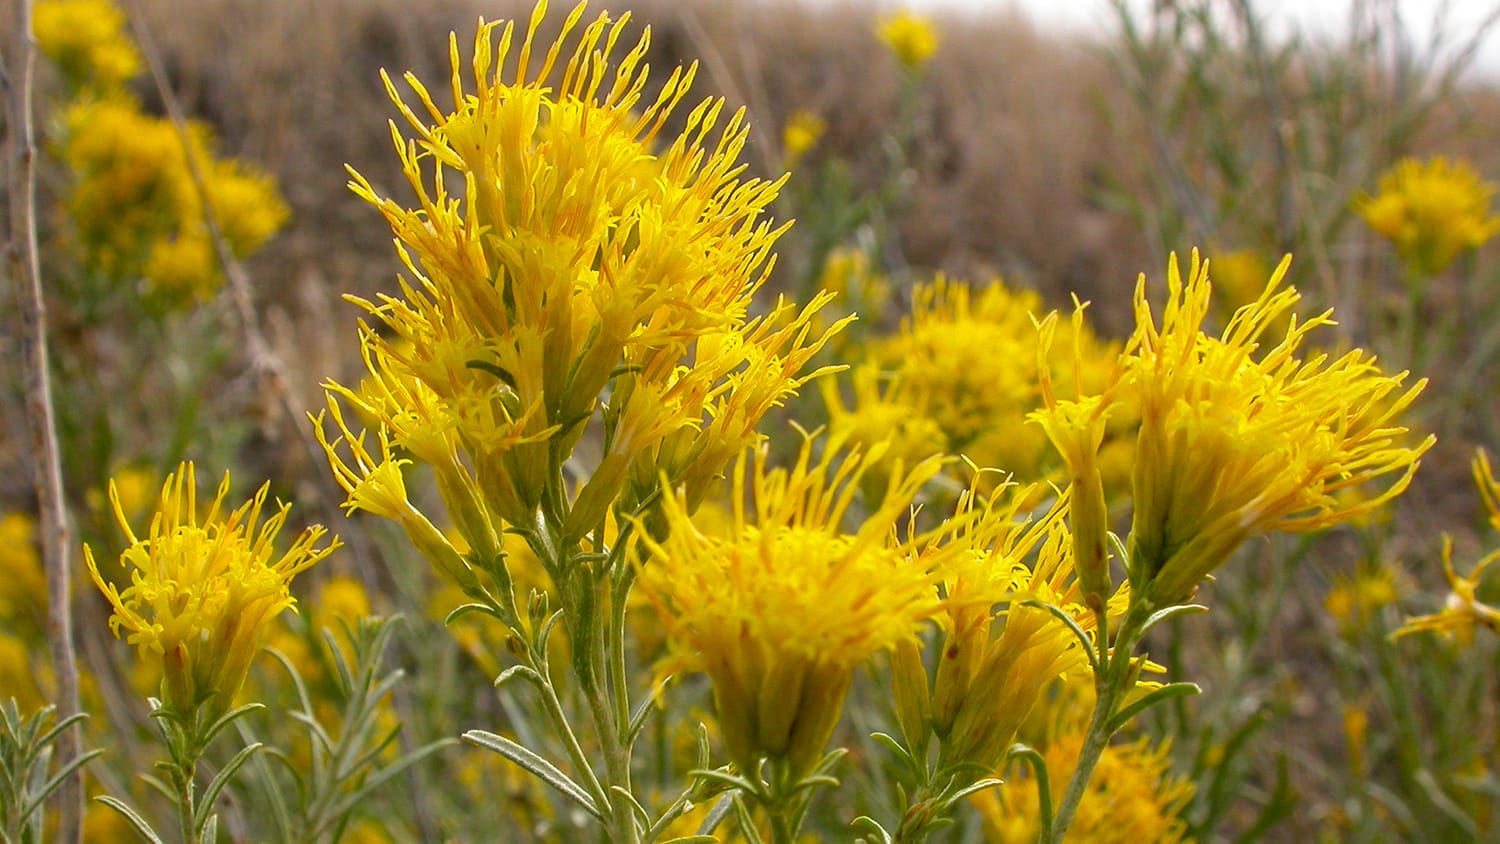 From the Rabittbrush wildflower, an FES flower essence is prepared.